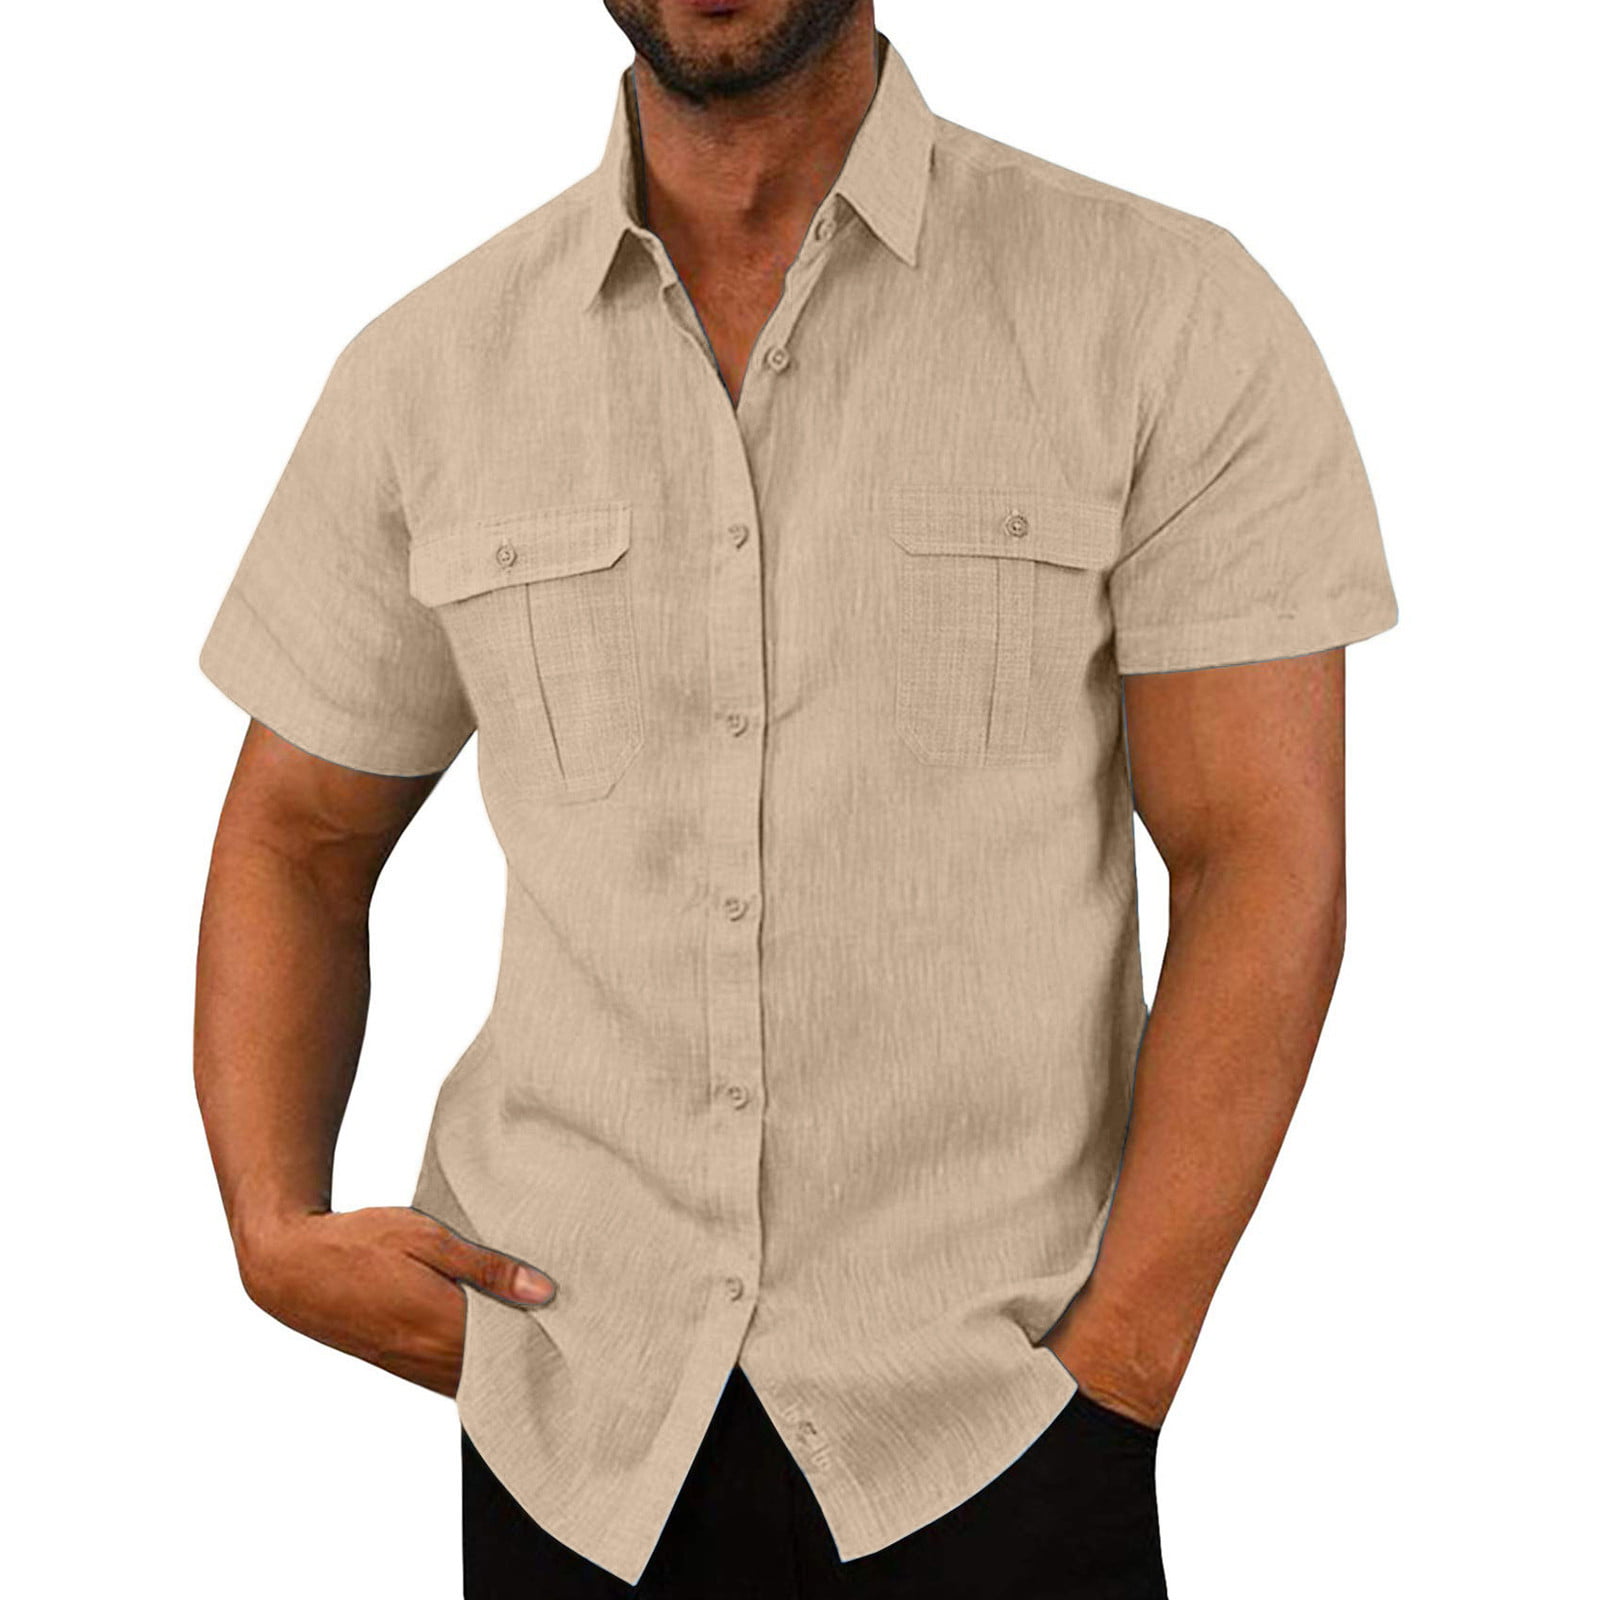 Male Casual Solid Top Shirt Double Pocket Short Sleeve Elegant